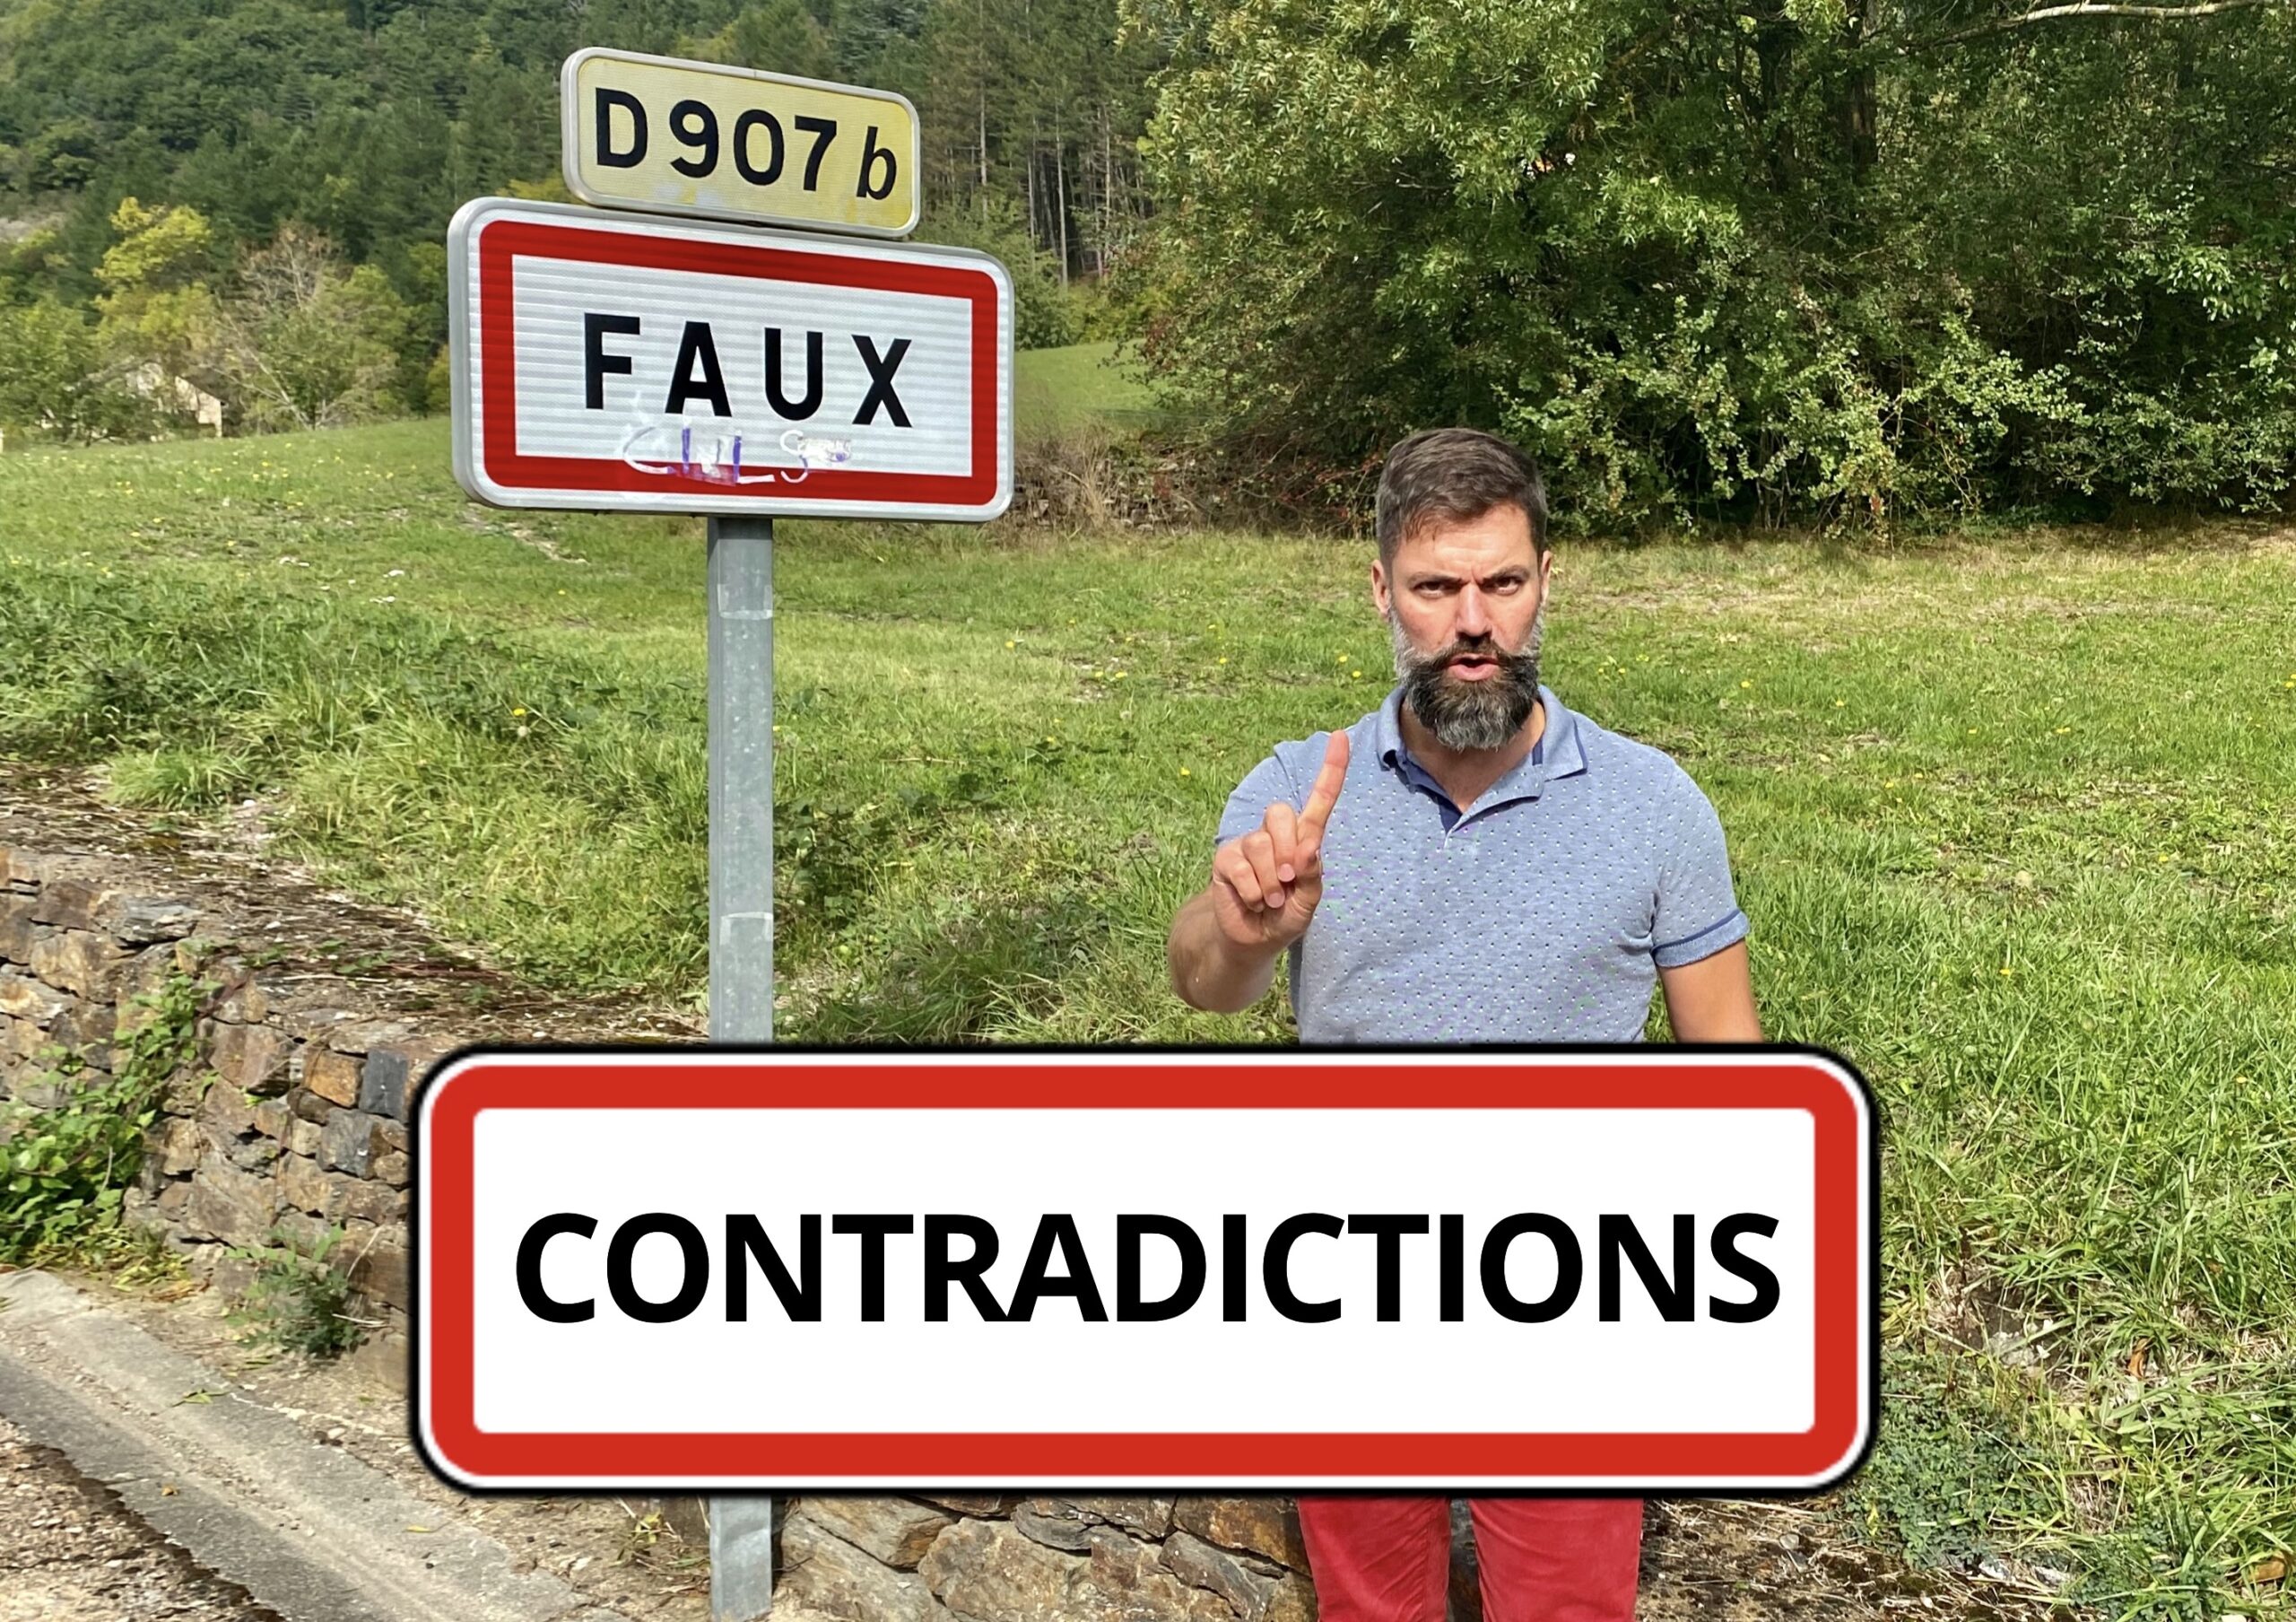 Contradictions image